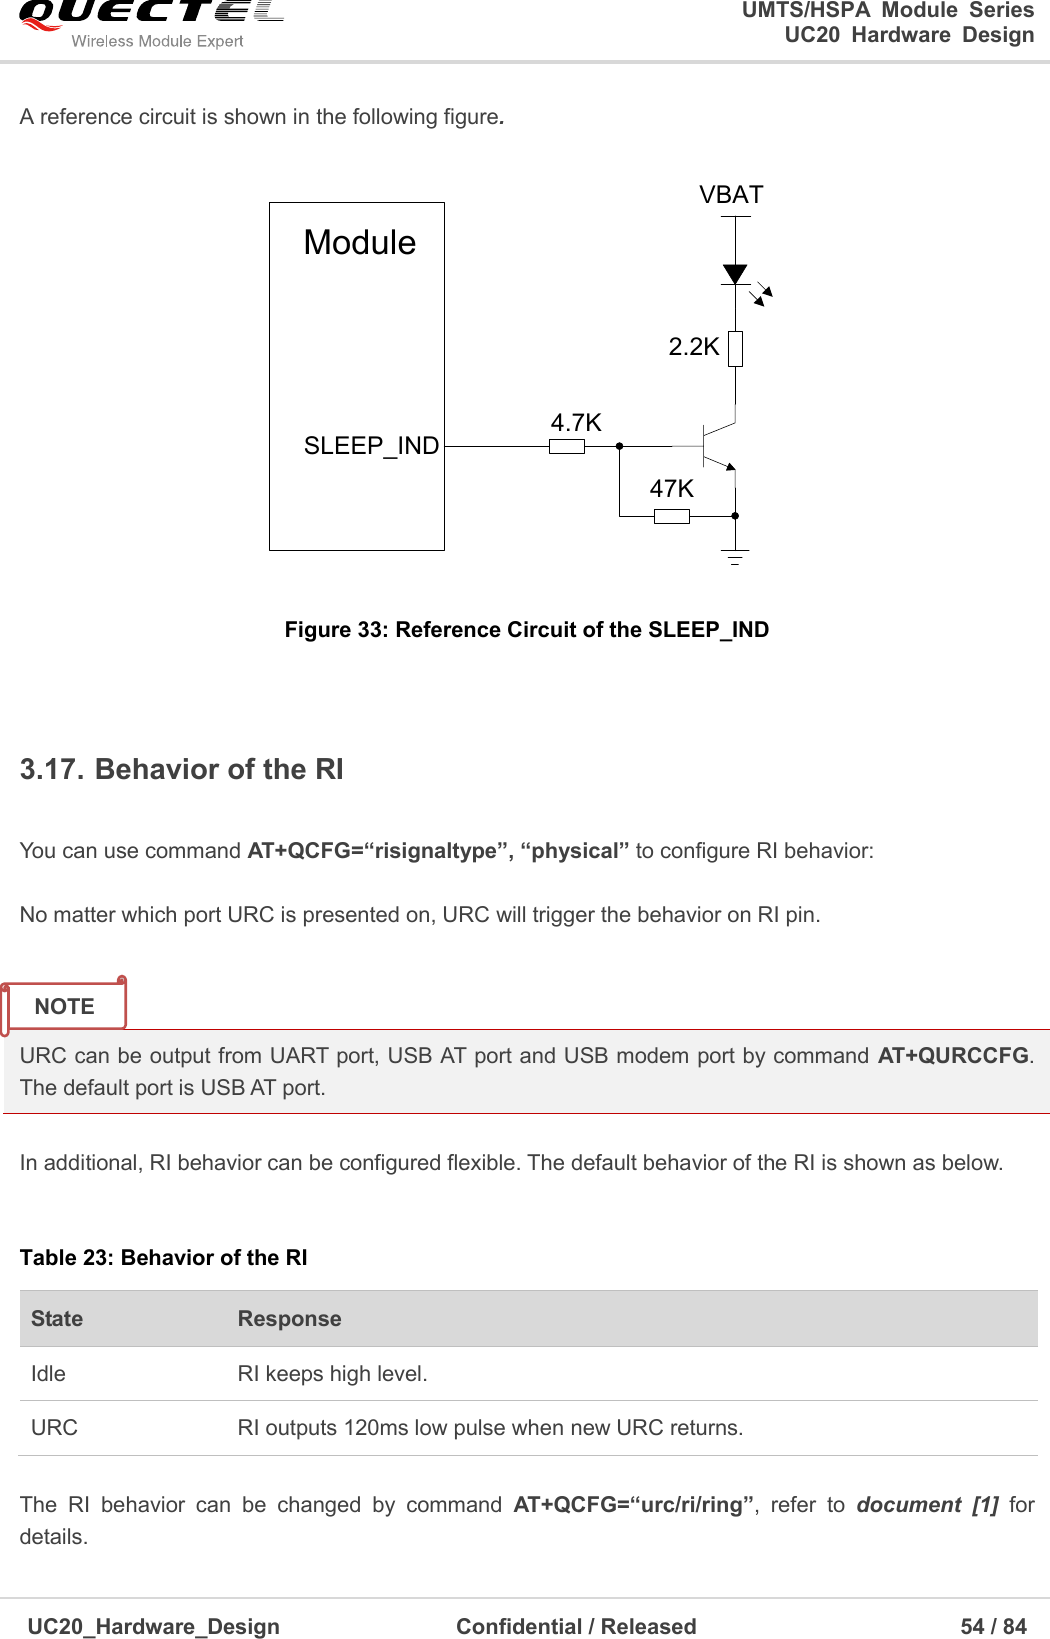                                                                                                                                               UMTS/HSPA  Module  Series                                                                 UC20  Hardware  Design  UC20_Hardware_Design                  Confidential / Released                            54 / 84     A reference circuit is shown in the following figure. 4.7K47KVBAT2.2KModuleSLEEP_IND Figure 33: Reference Circuit of the SLEEP_IND  3.17. Behavior of the RI  You can use command AT+QCFG=“risignaltype”, “physical” to configure RI behavior:  No matter which port URC is presented on, URC will trigger the behavior on RI pin.   URC can be output from UART port, USB AT port and USB modem port by command AT+QURCCFG. The default port is USB AT port.  In additional, RI behavior can be configured flexible. The default behavior of the RI is shown as below.  Table 23: Behavior of the RI State Response Idle RI keeps high level. URC RI outputs 120ms low pulse when new URC returns.  The  RI  behavior  can  be  changed  by  command  AT+QCFG=“urc/ri/ring”,  refer  to  document  [1]  for details. NOTE 